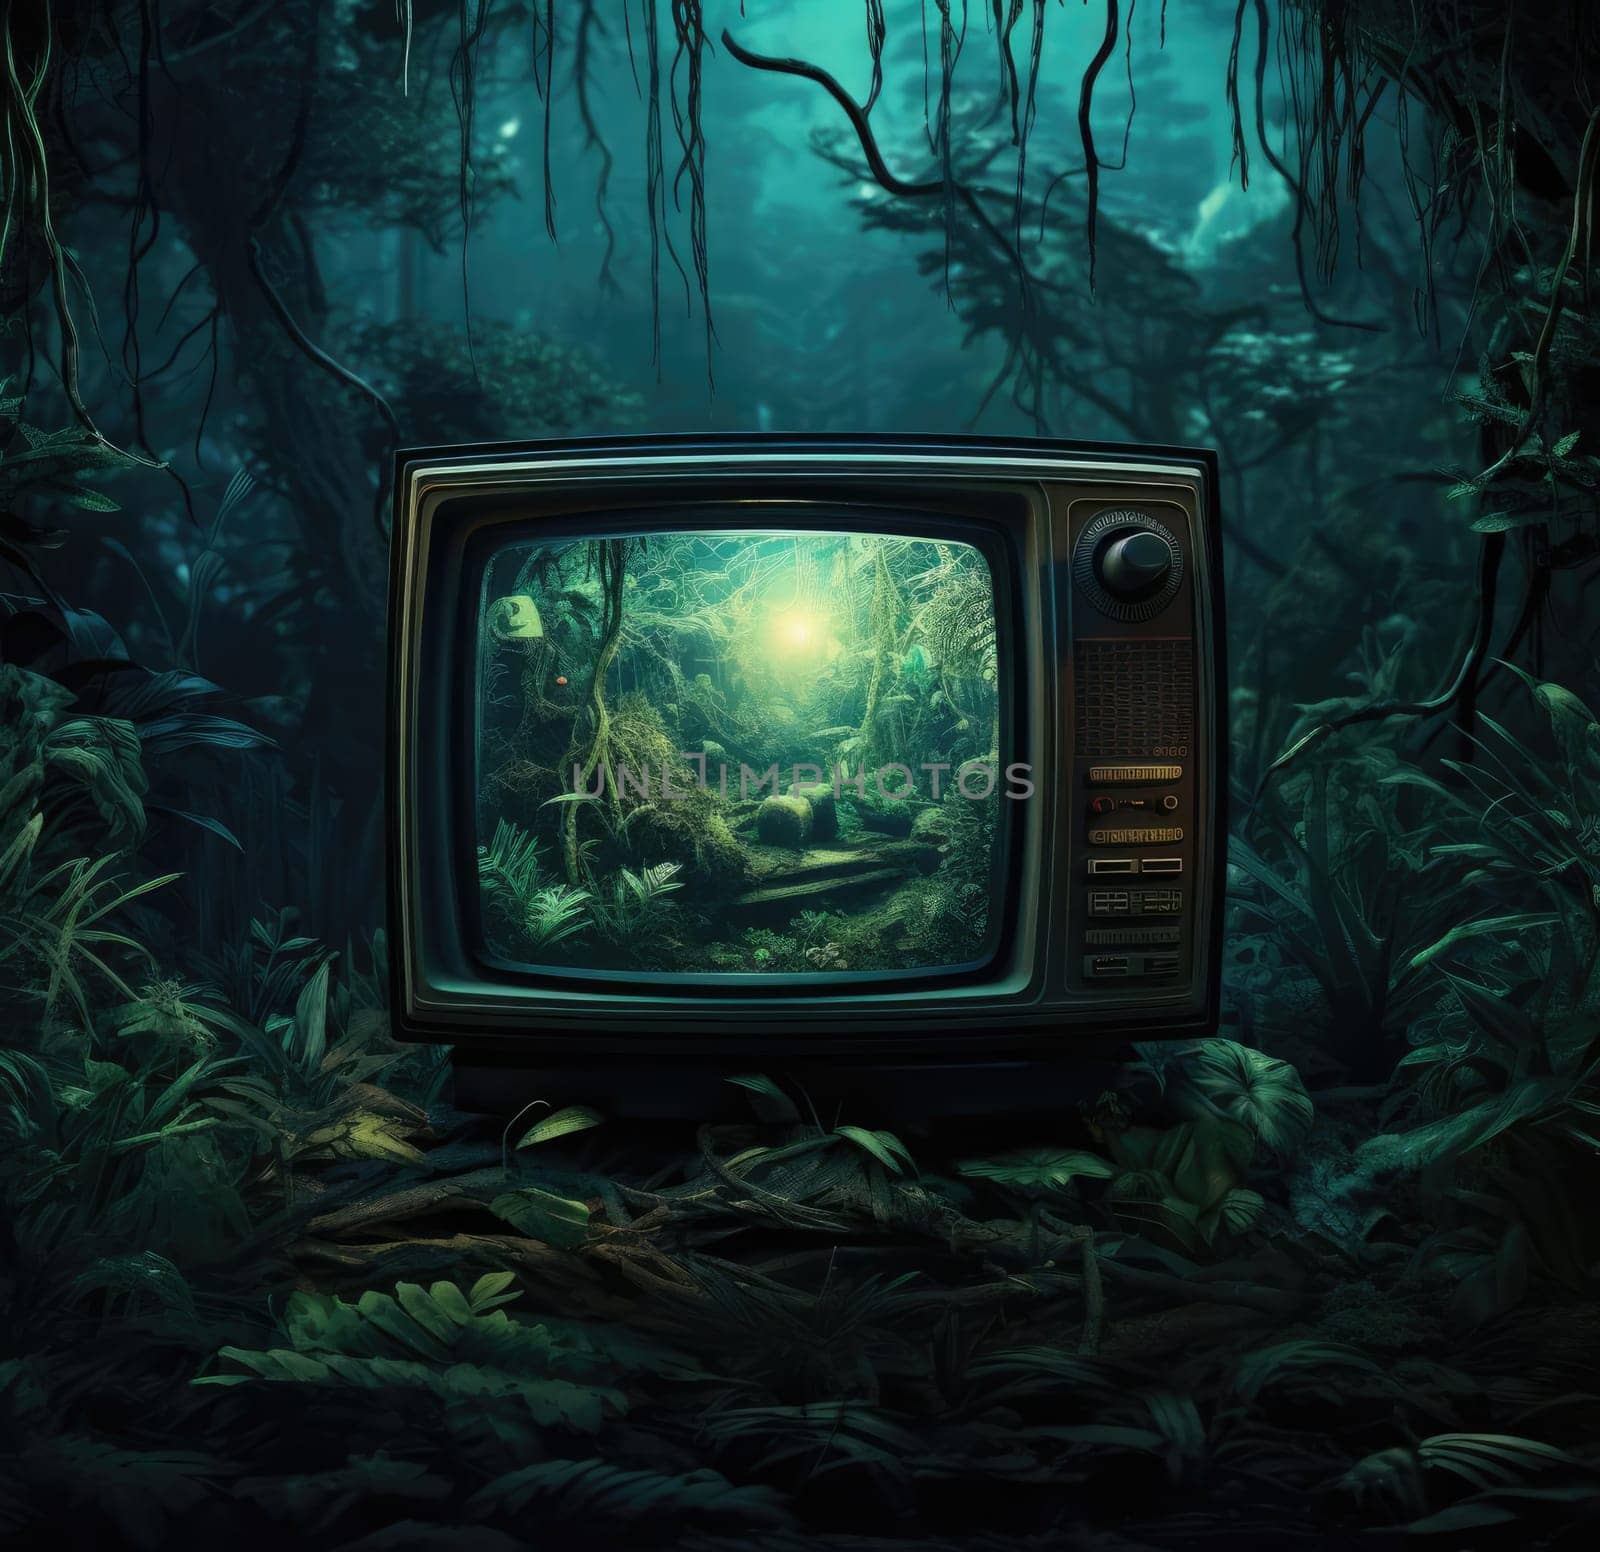 An old TV turned on in the green jungle